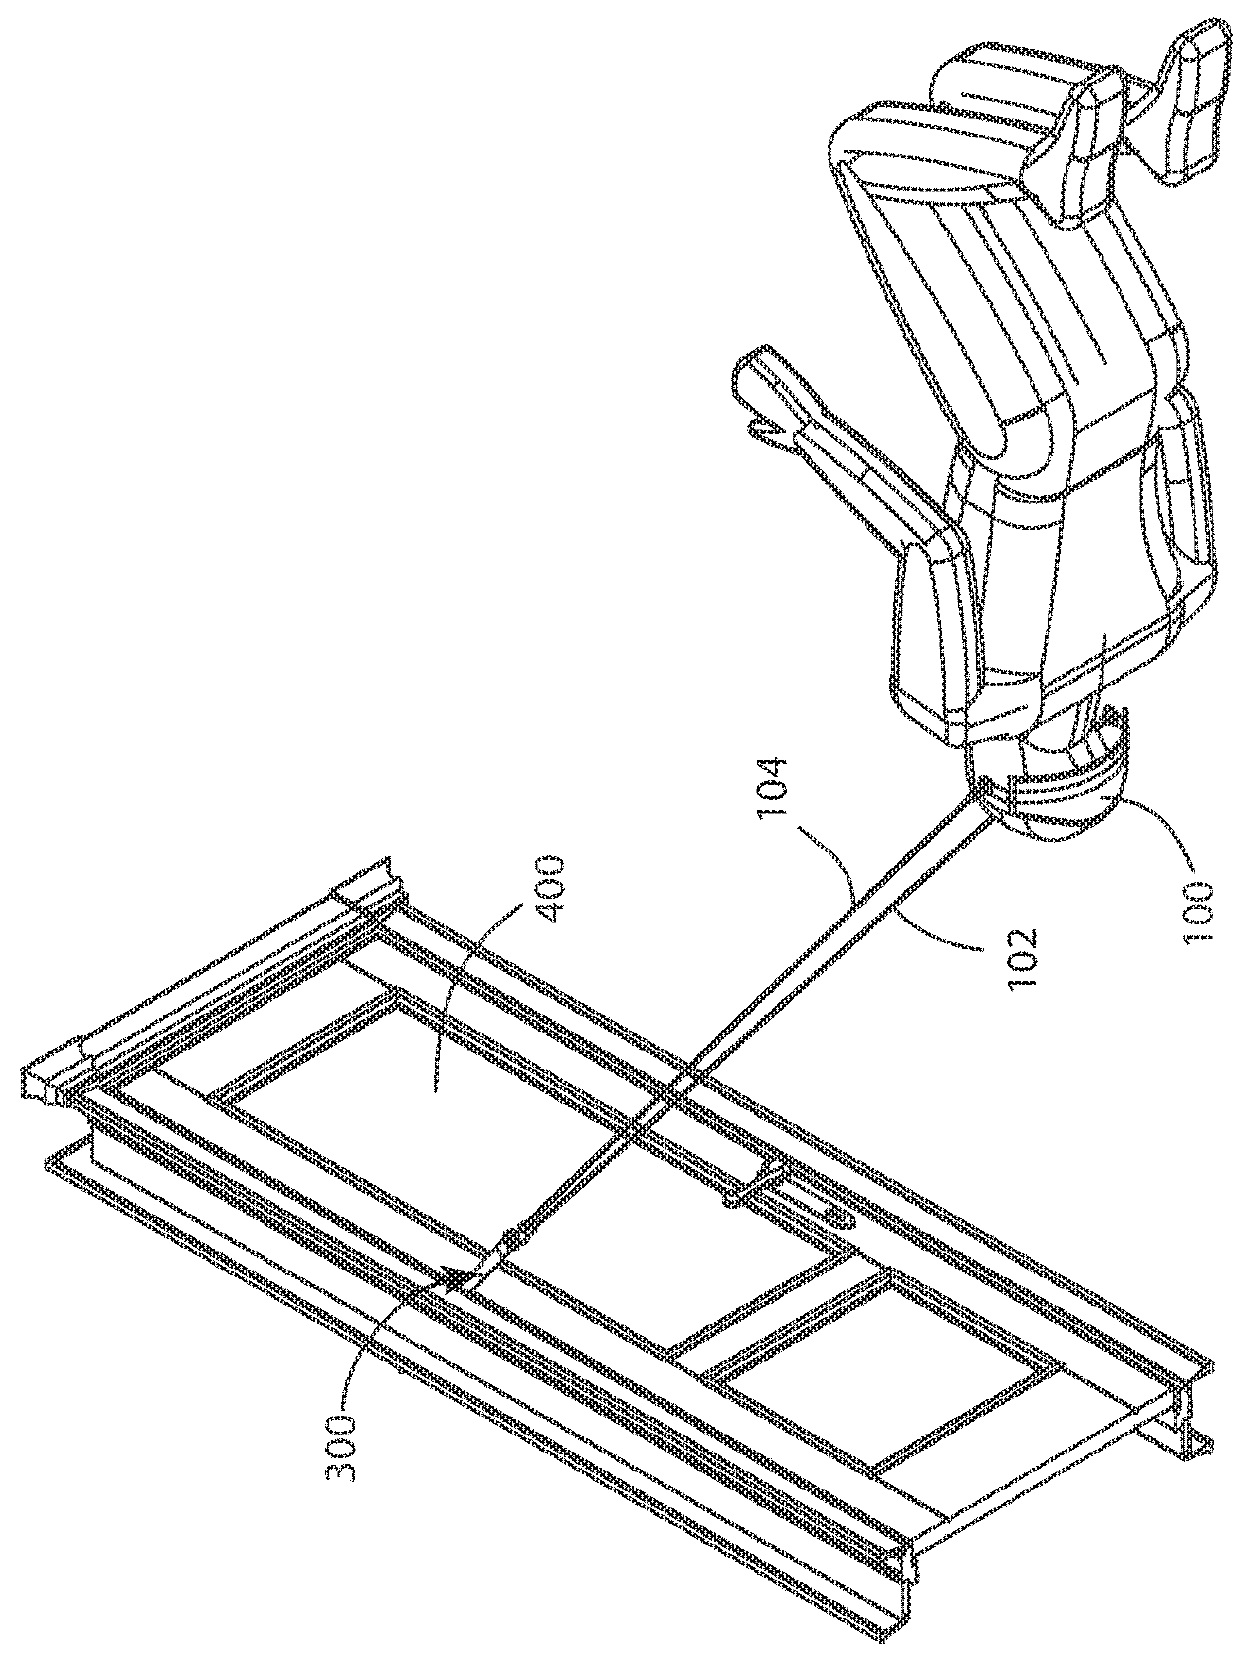 Portable traction device with sling